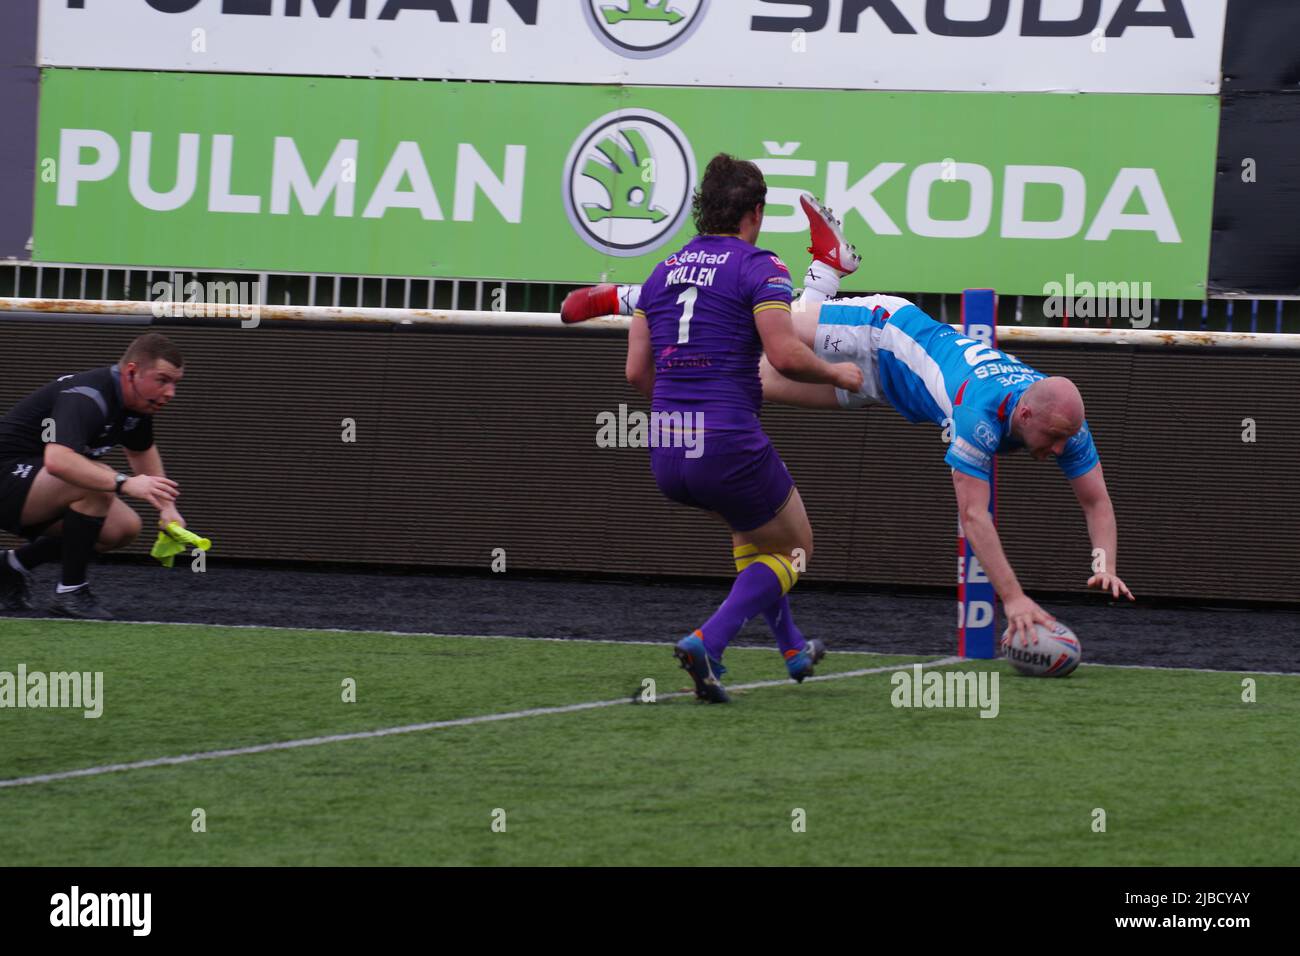 Newcastle, England, 5 June 2022. Matty Chrimes diving to score a try for Sheffield Eagles against Newcastle Thunder in the Betfred Championship at Kingston Park. Credit: Colin Edwards / Alamy Live News Stock Photo